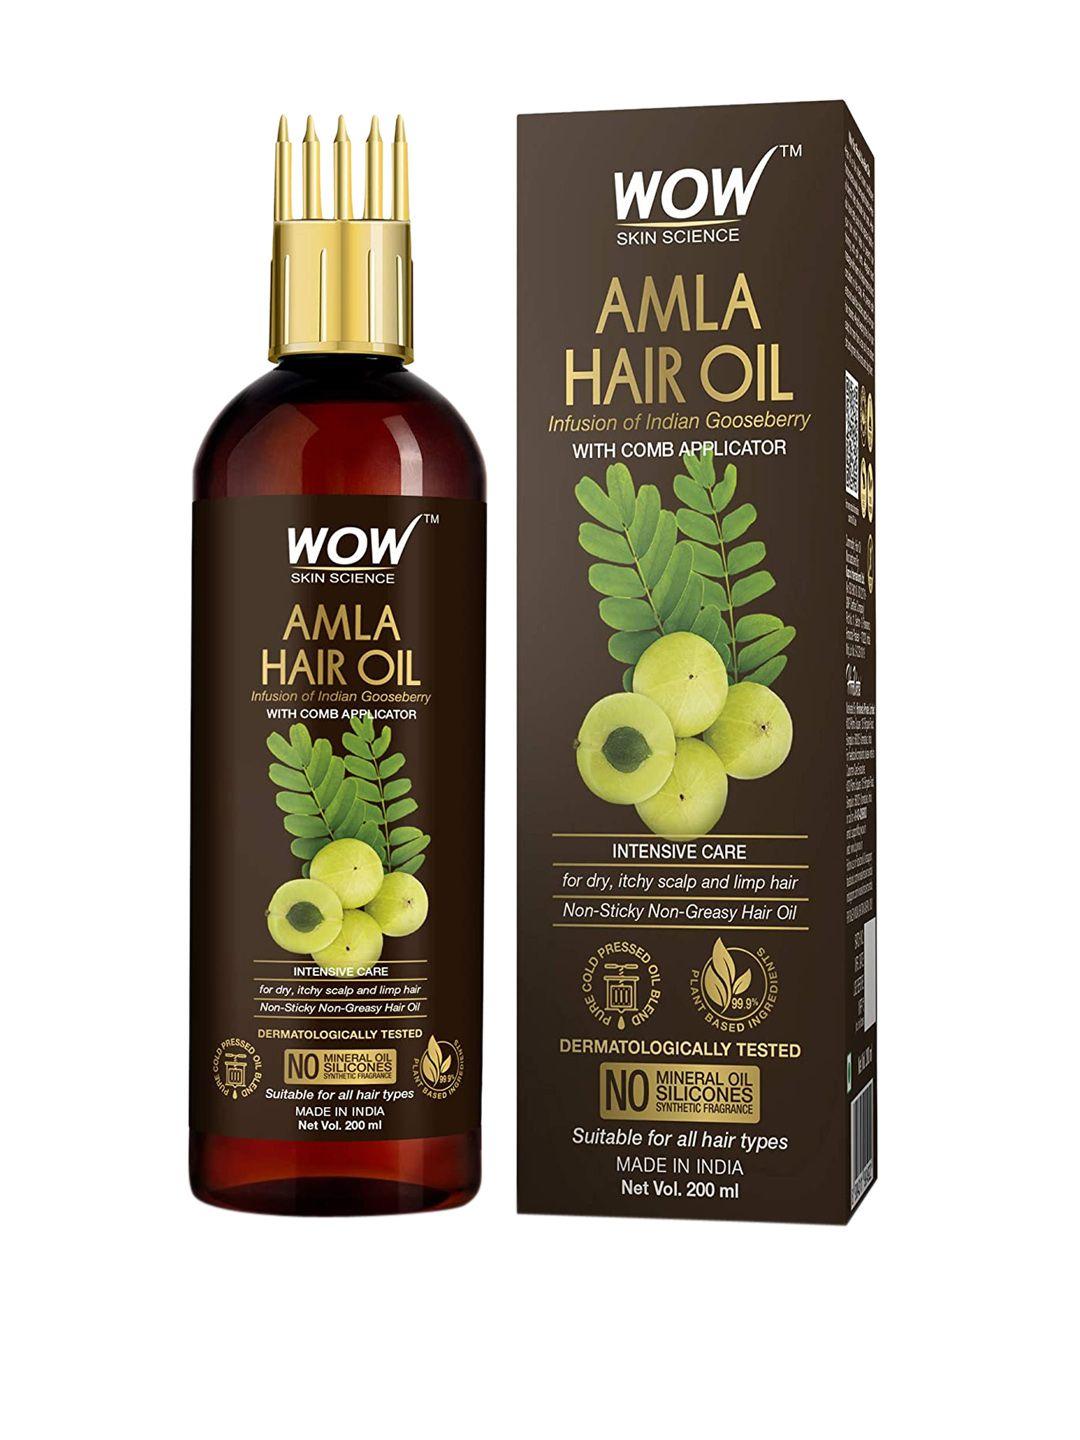 wow skin science amla hair oil with comb applicator-200ml